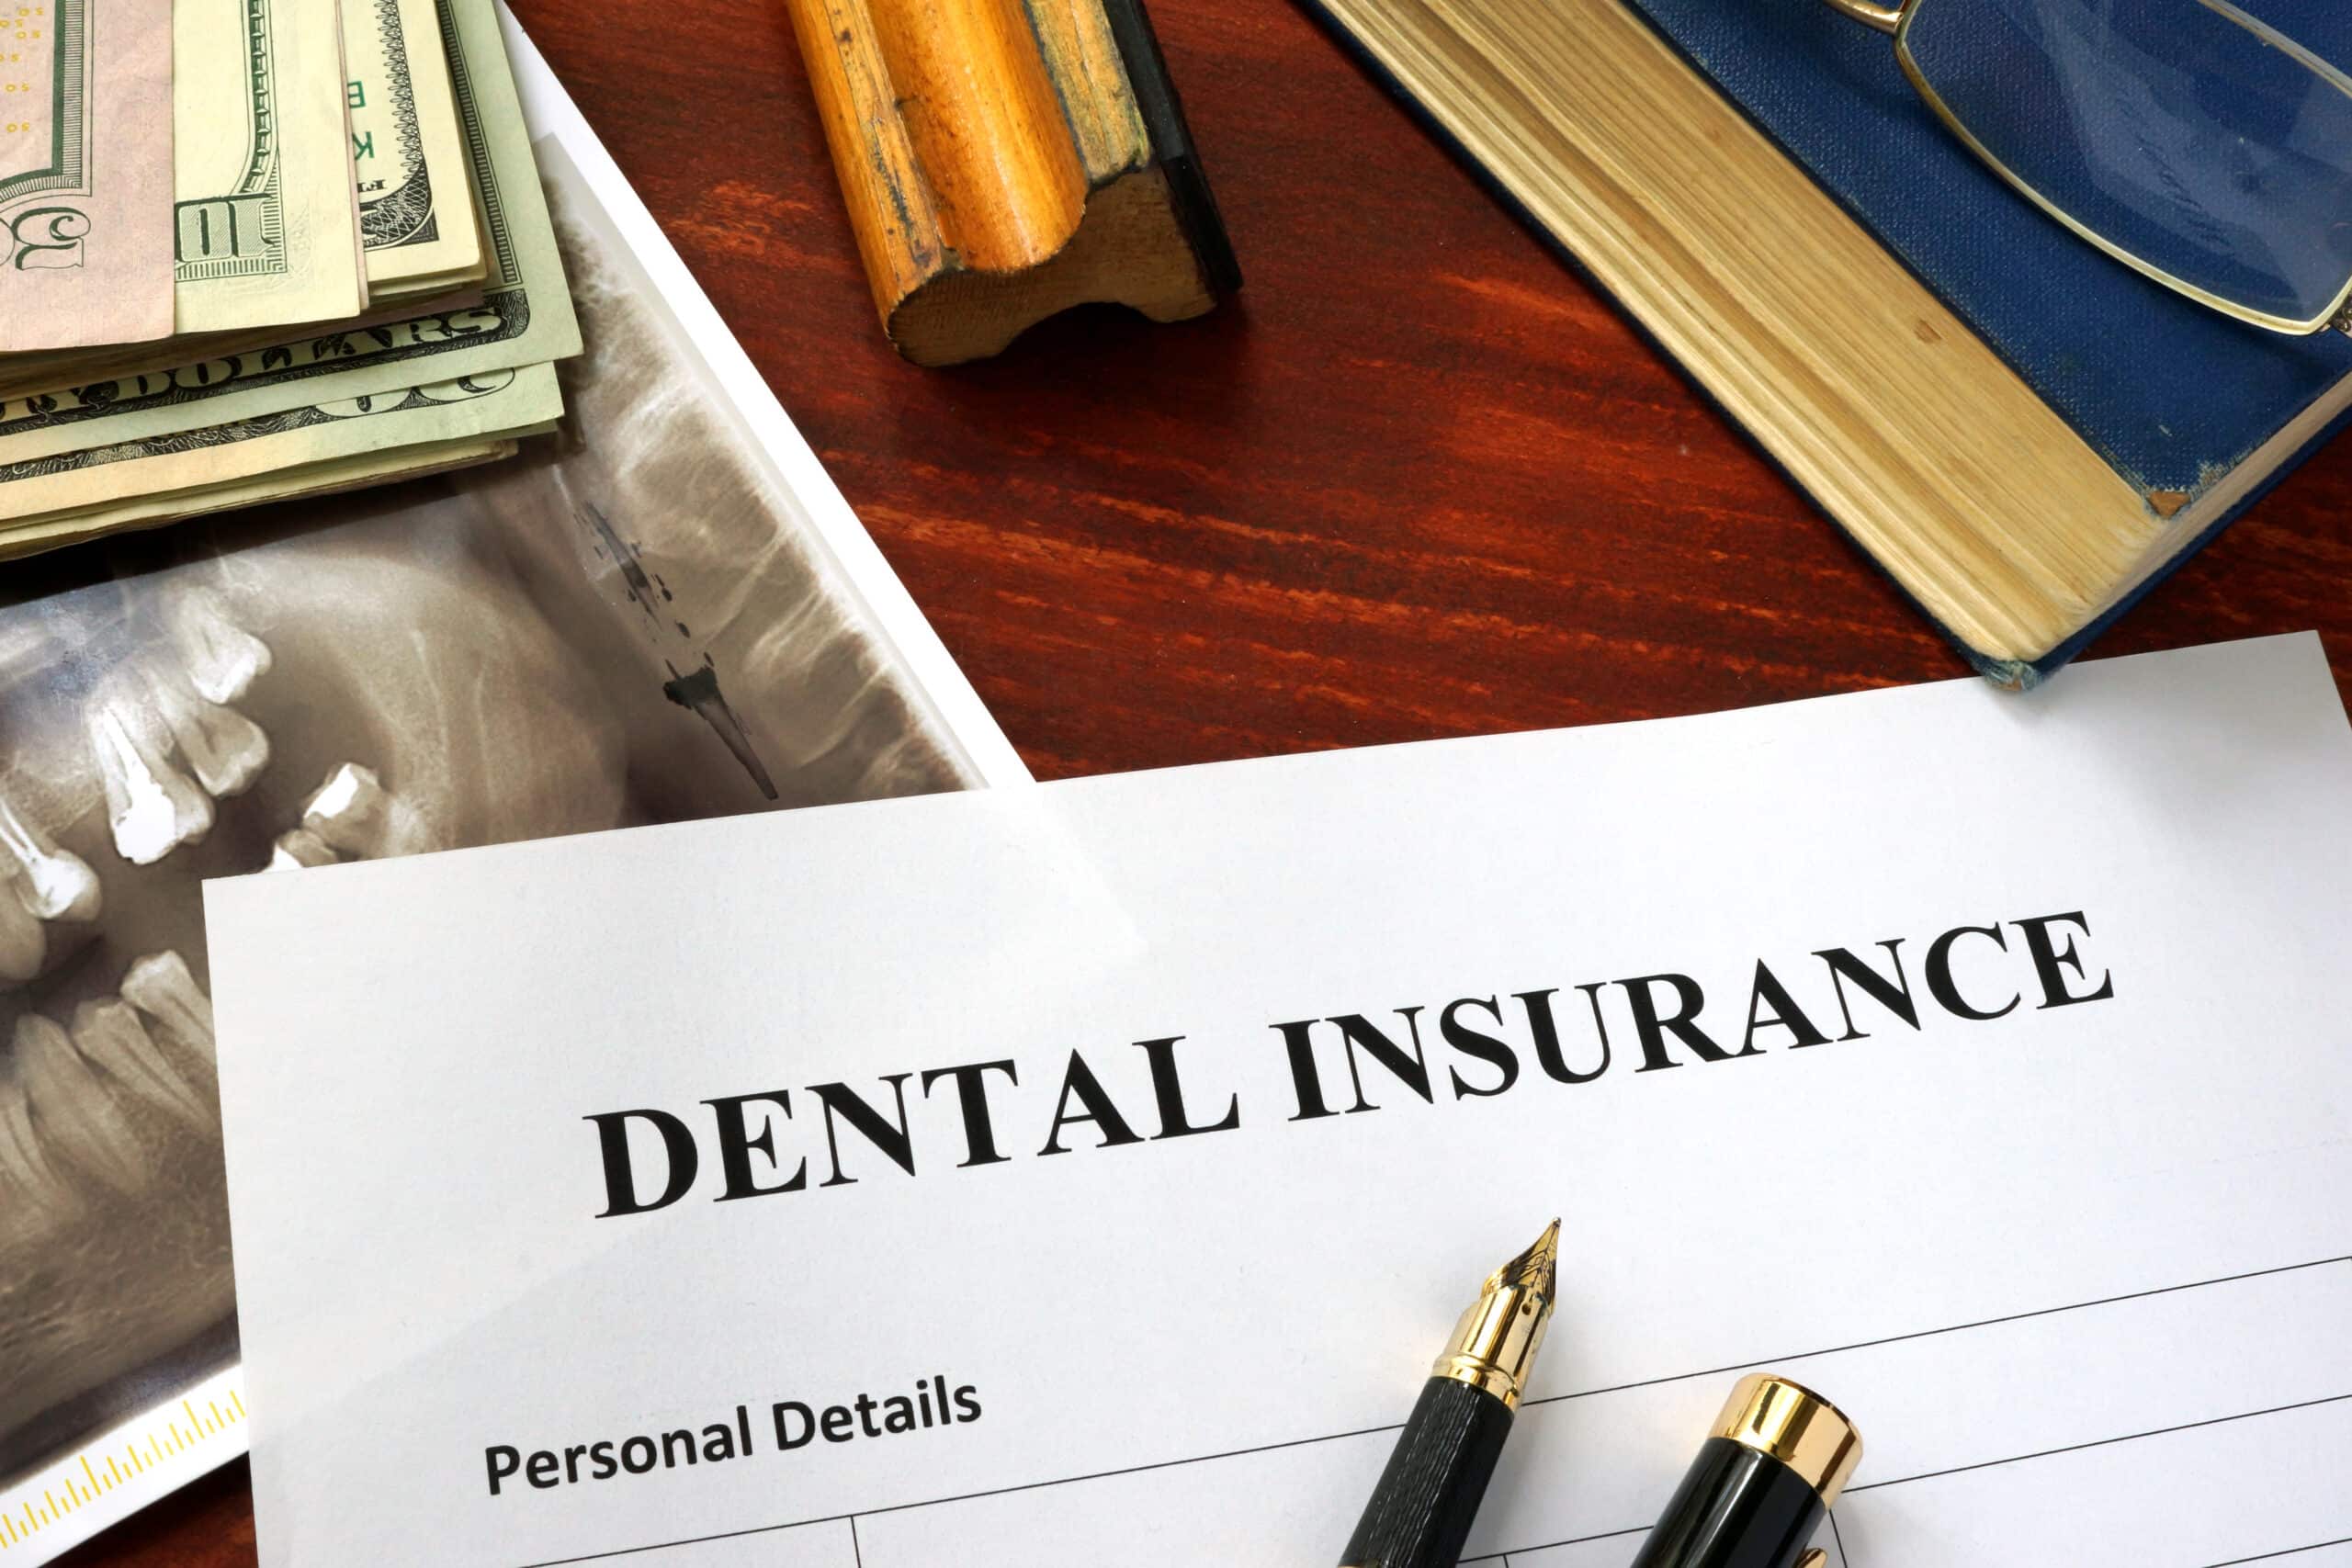 dental insurance policy on a table and a book 